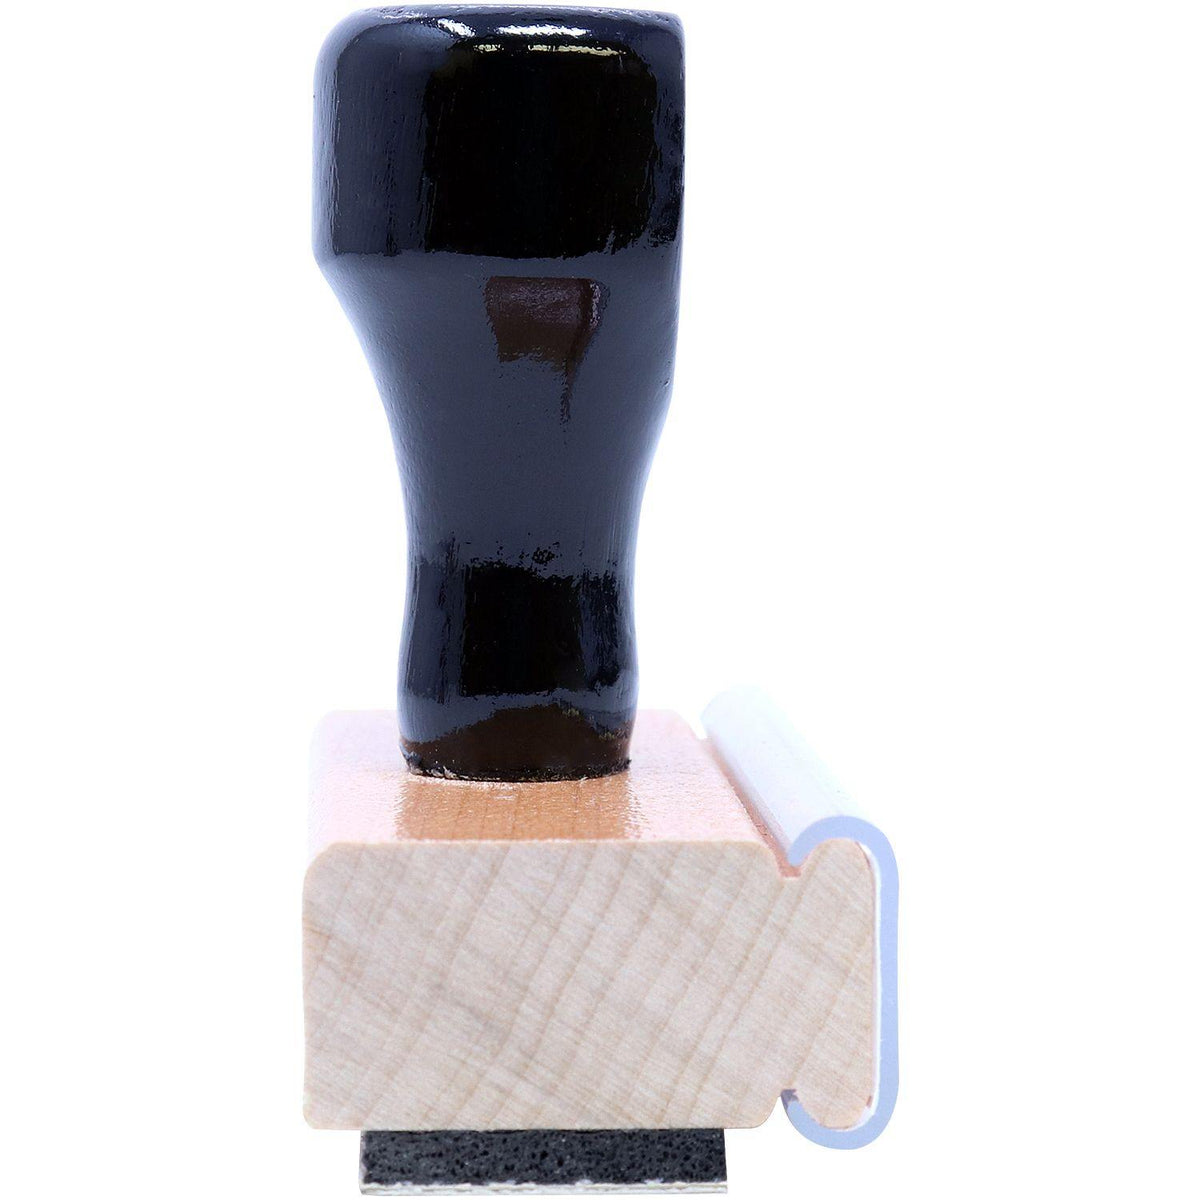 Read and Route with Lines Rubber Stamp - Engineer Seal Stamps - Brand_Acorn, Impression Size_Small, Stamp Type_Regular Stamp, Type of Use_General, Type of Use_Office